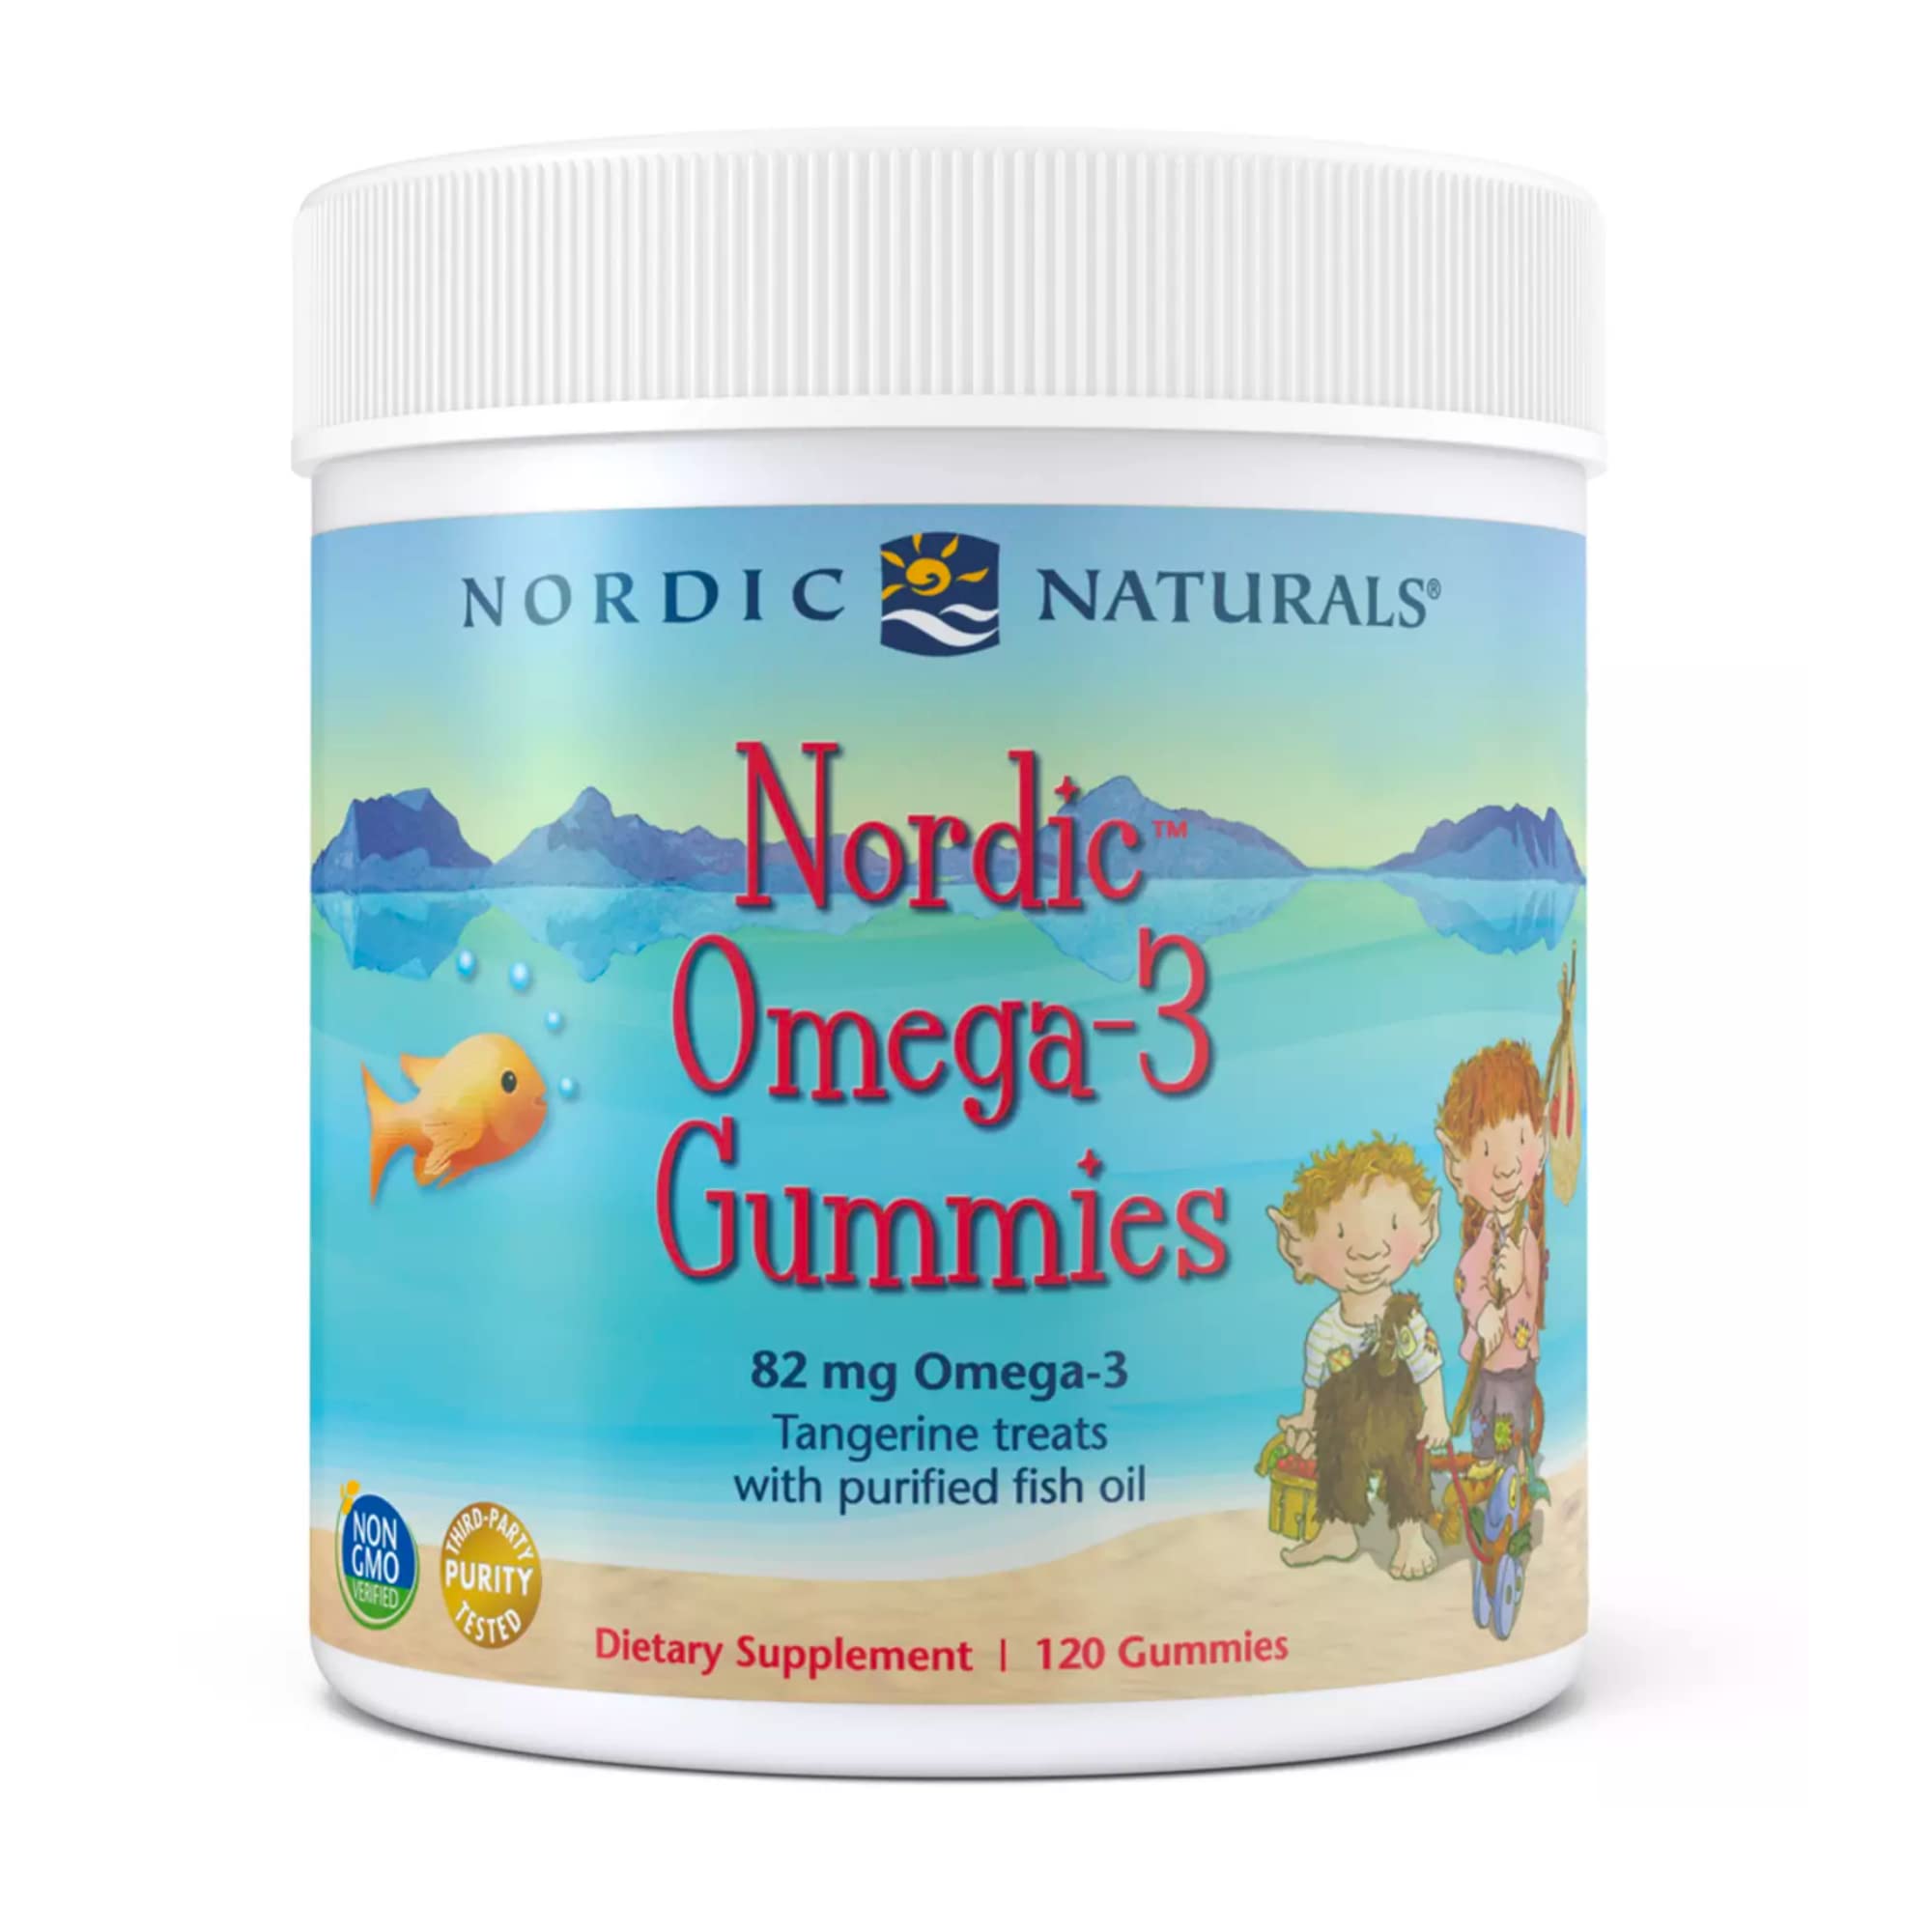 Nordic Naturals - Nordic Omega-3 Gummies, Supports Optimal Brain and Immune Function, 120 Count